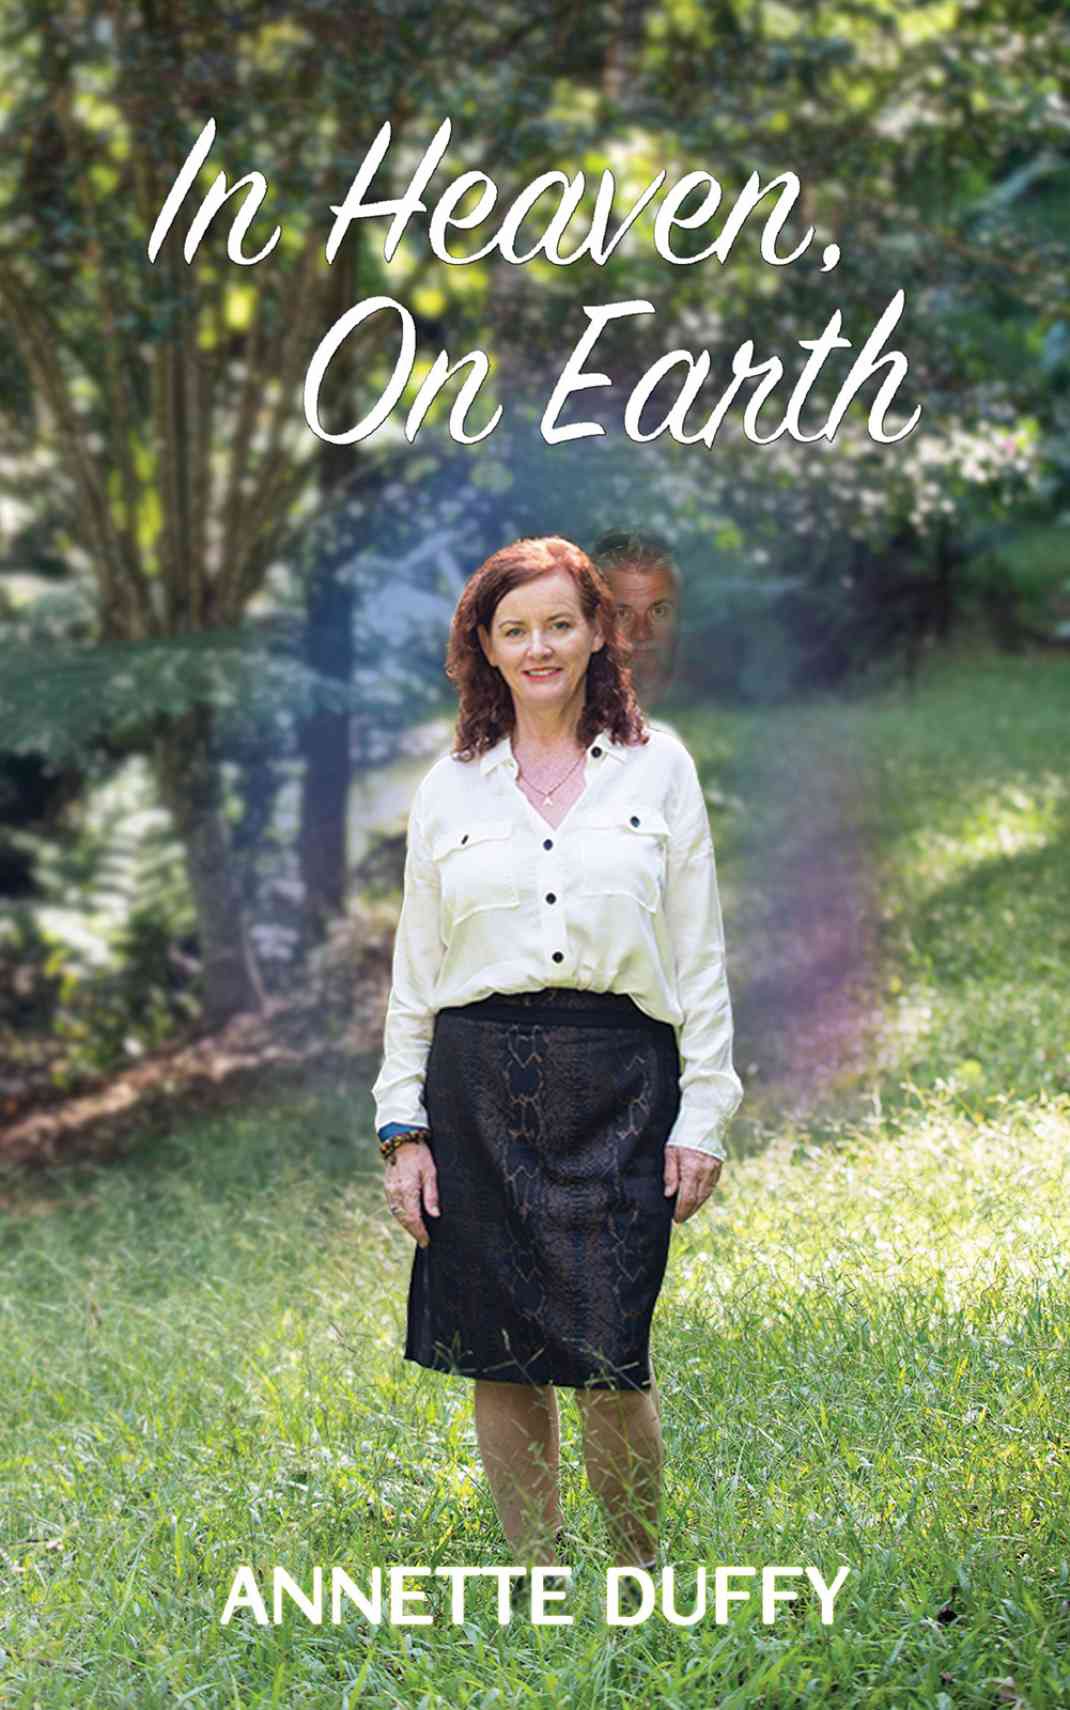 Promotional Video released for the book ‘In Heaven, On Earth’ by Annette Duffy